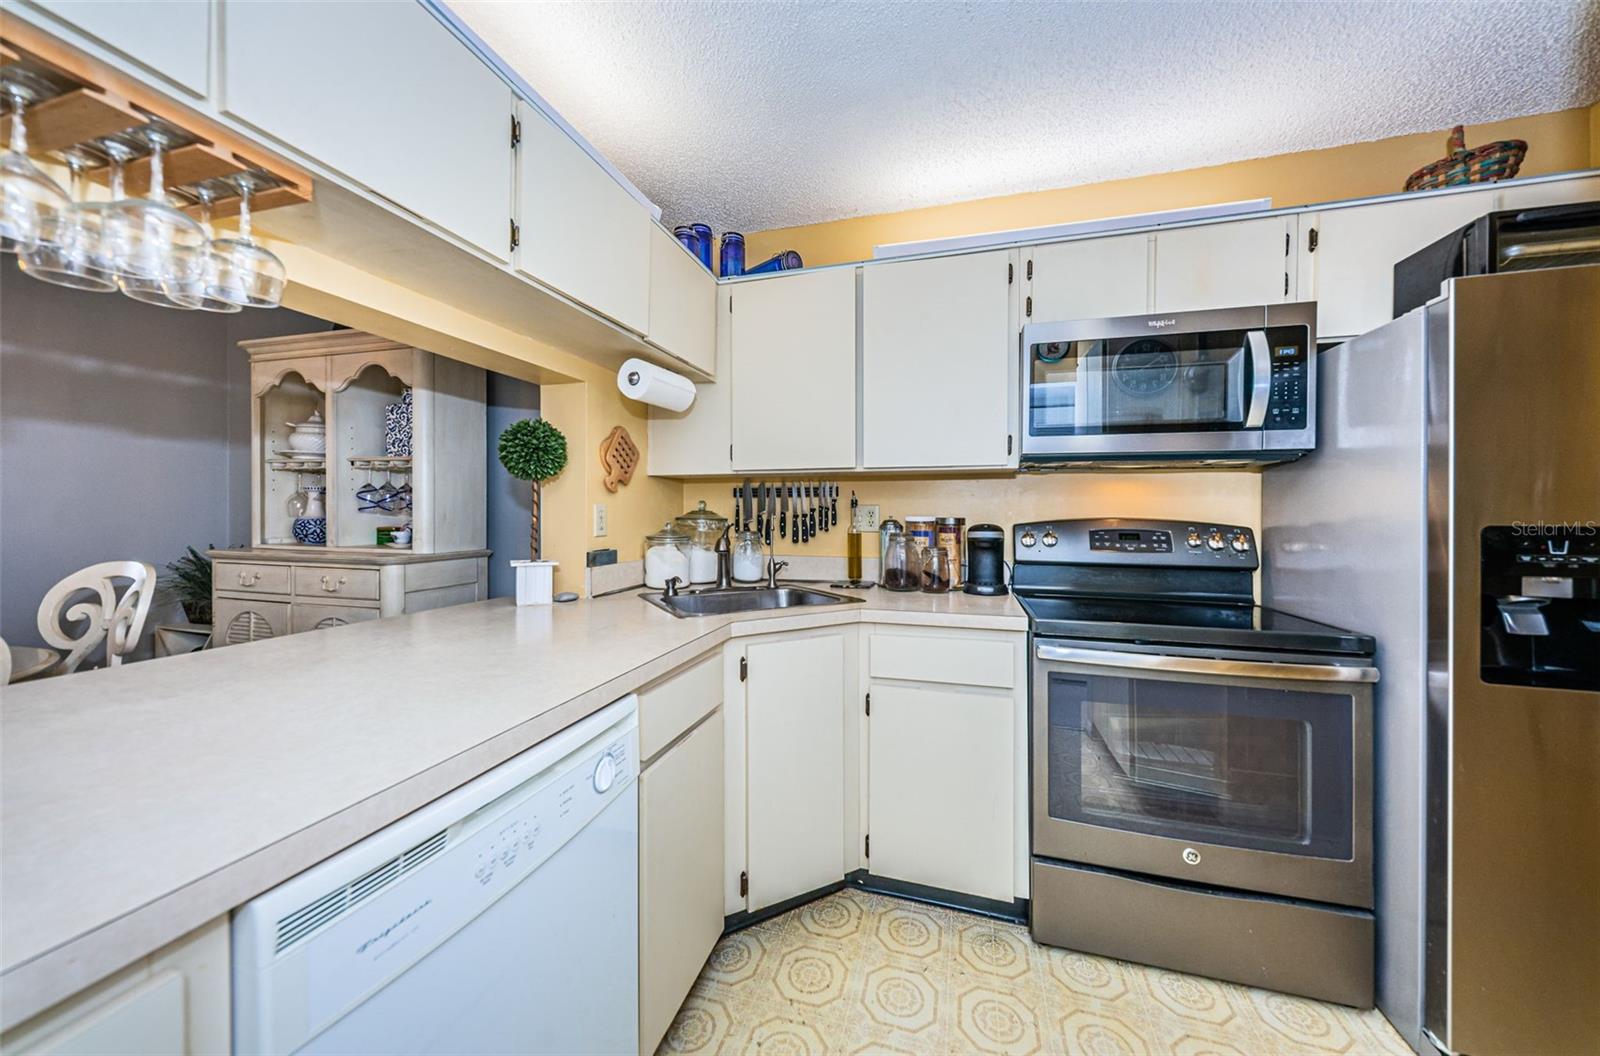 Functional kitchen with newer appliances